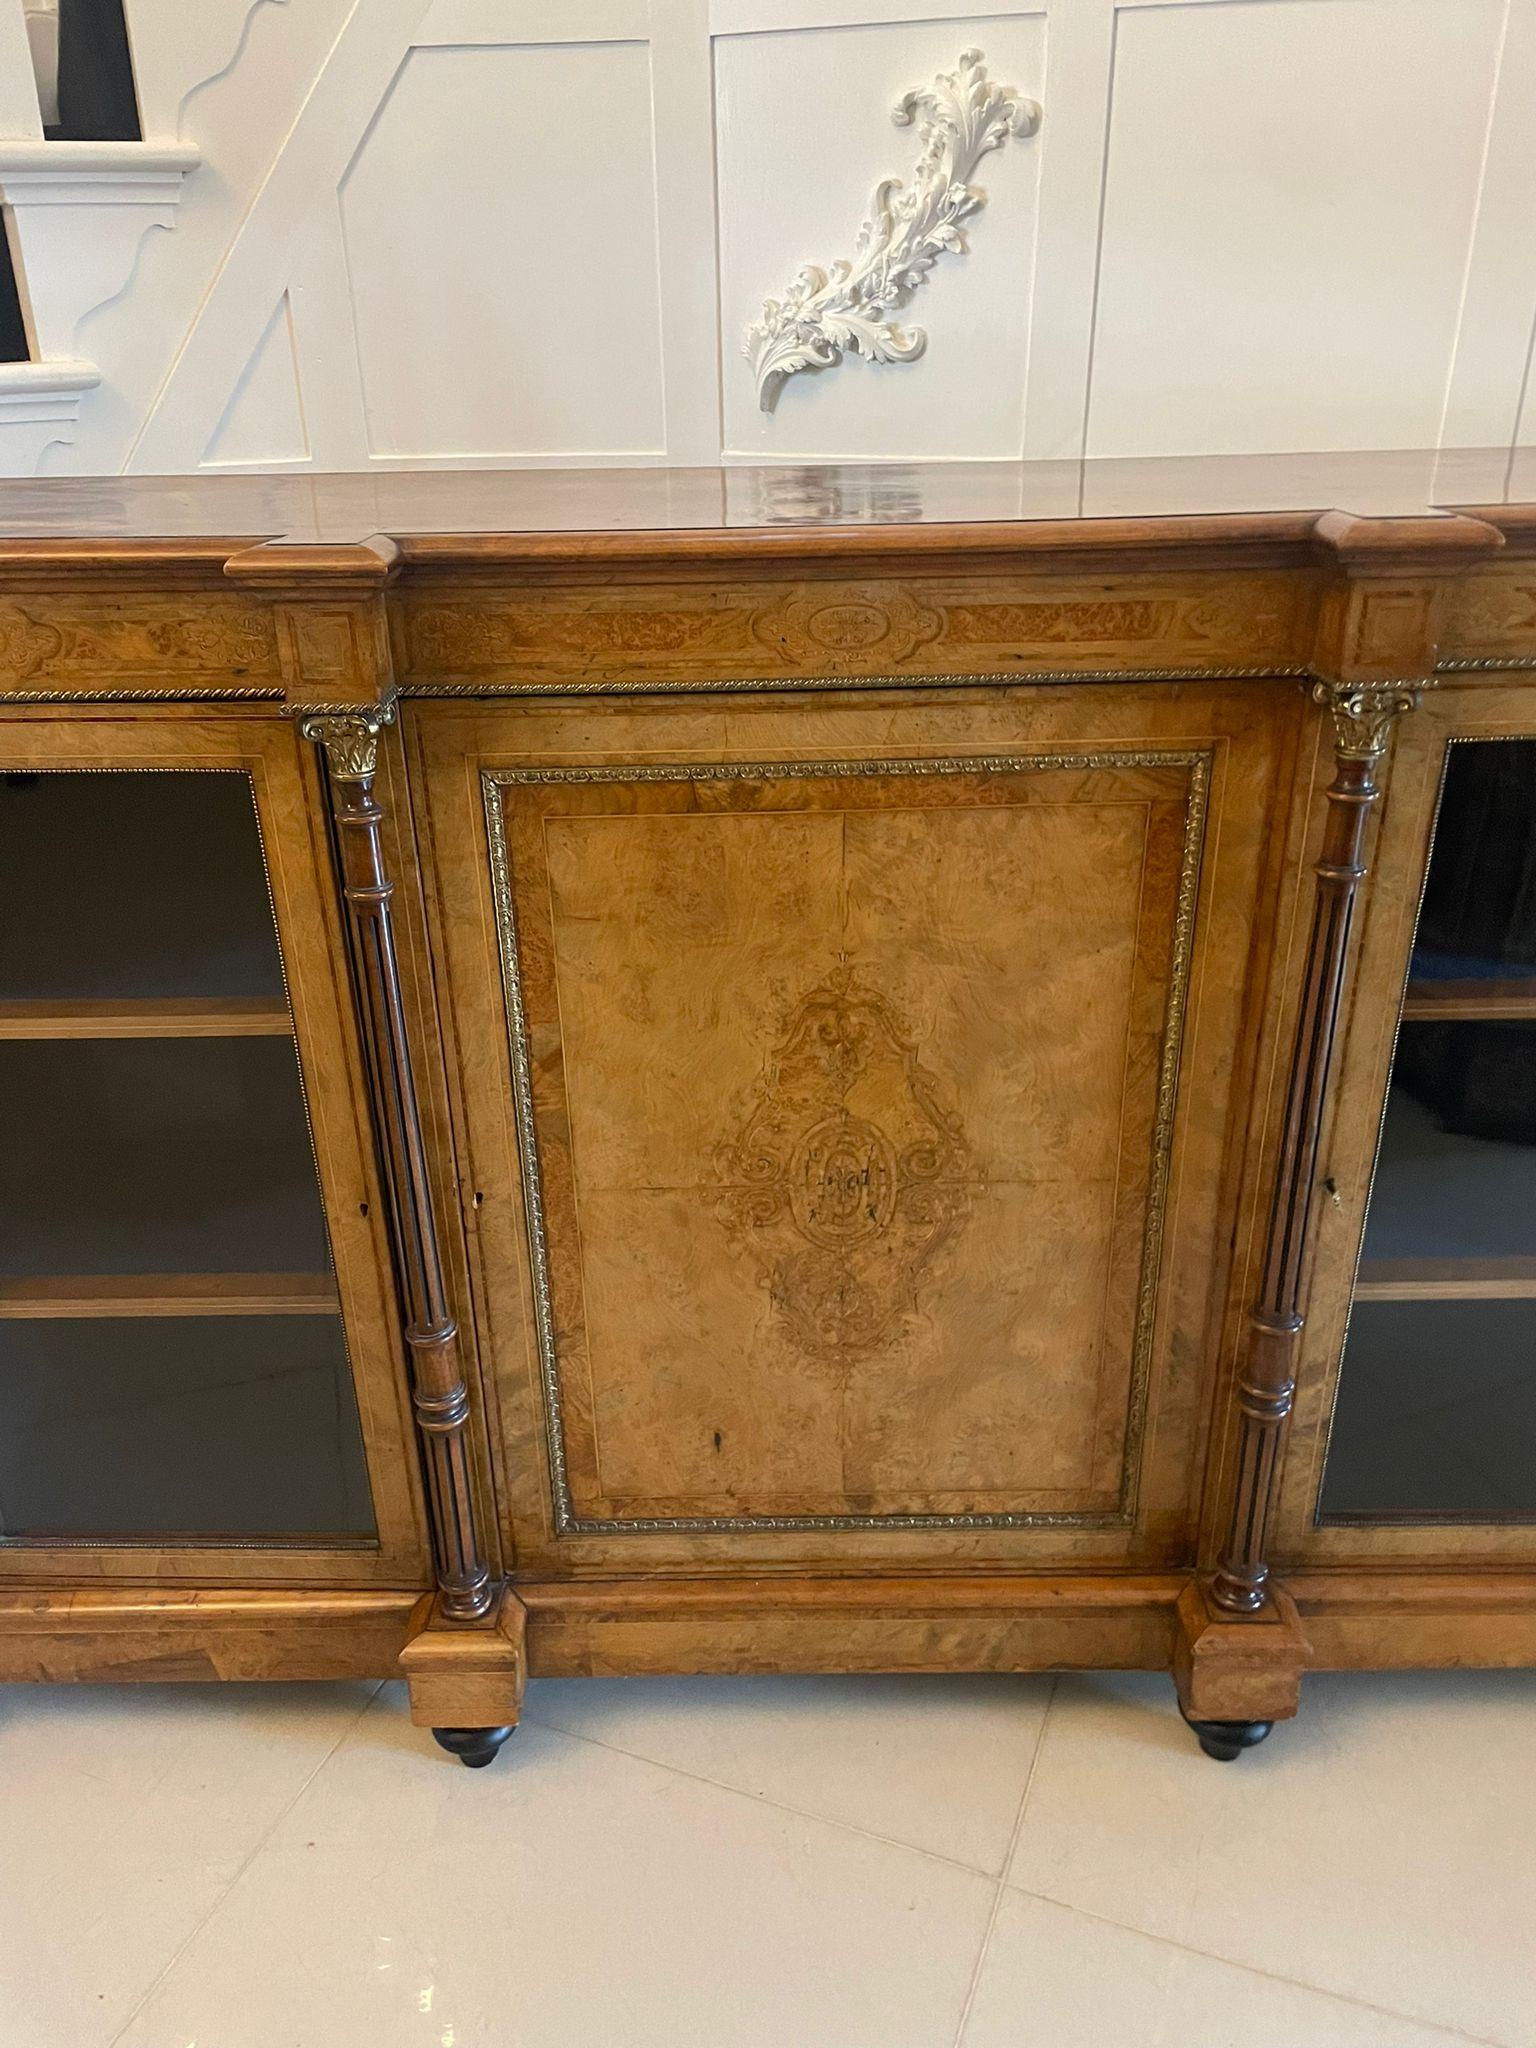 Outstanding Quality Antique Victorian Burr Walnut Inlaid Credenza/Sideboard In Good Condition For Sale In Suffolk, GB